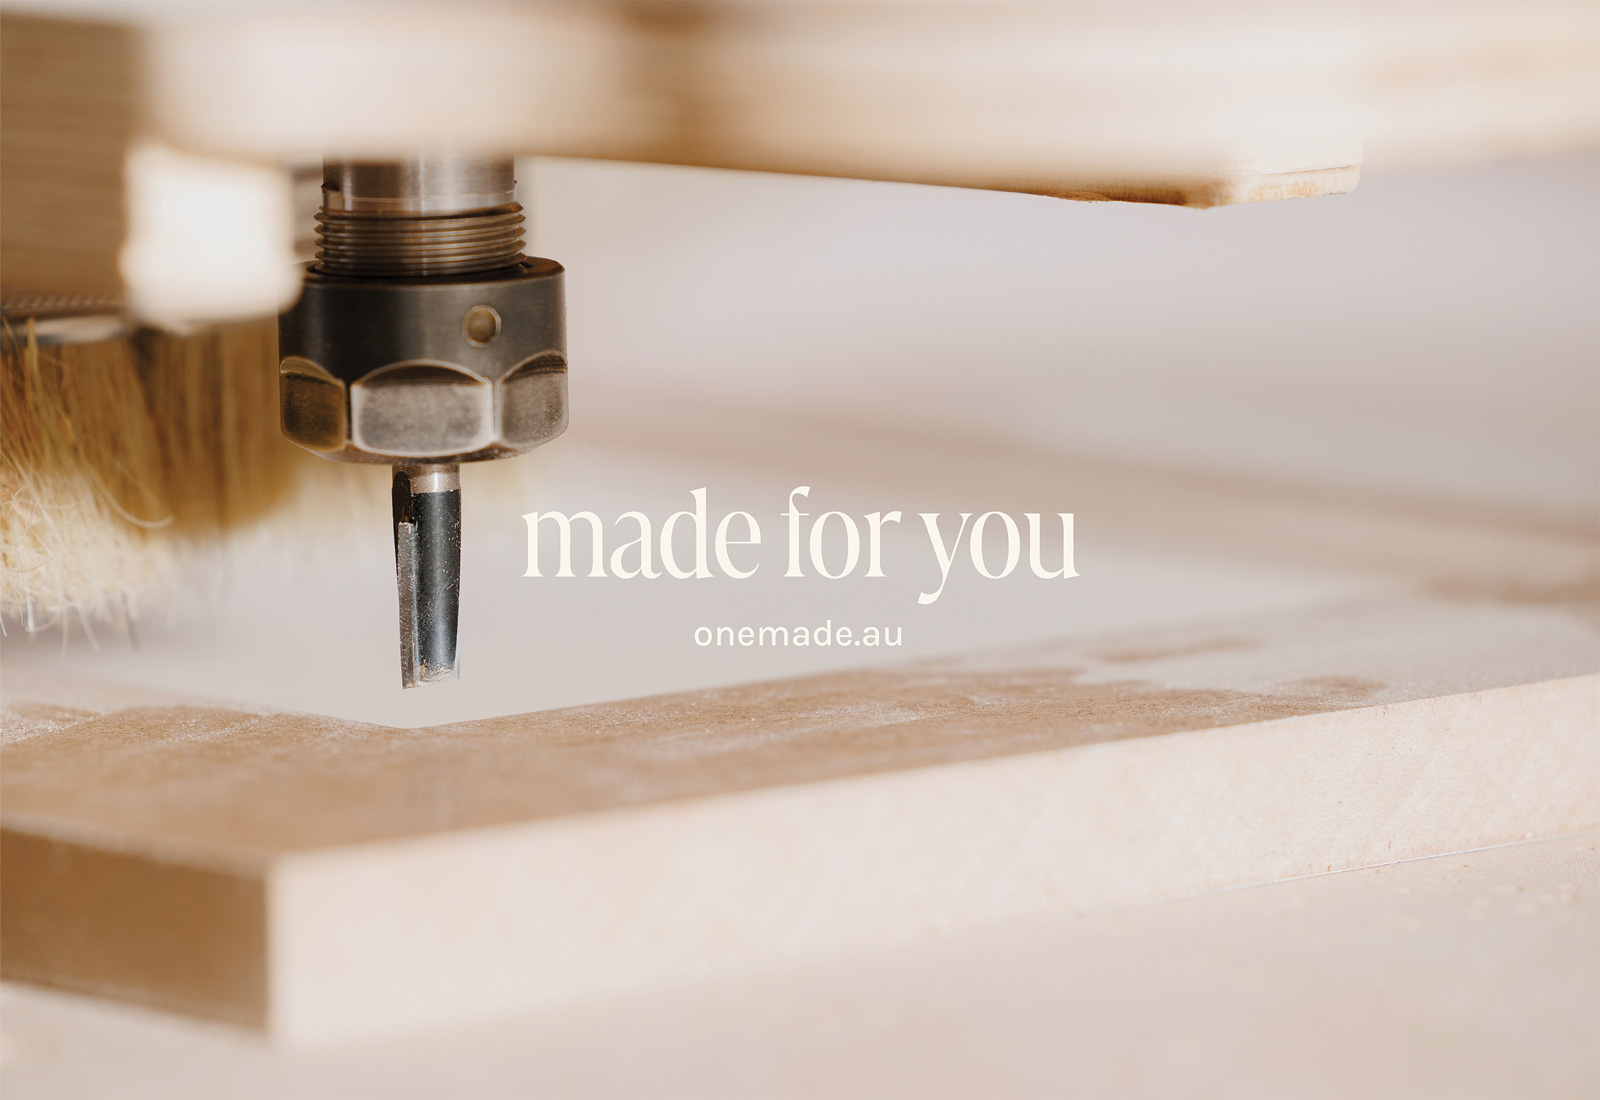 CNC Router cuts out custom cabinetry for Onemade a brand that specialises in custom cabinets